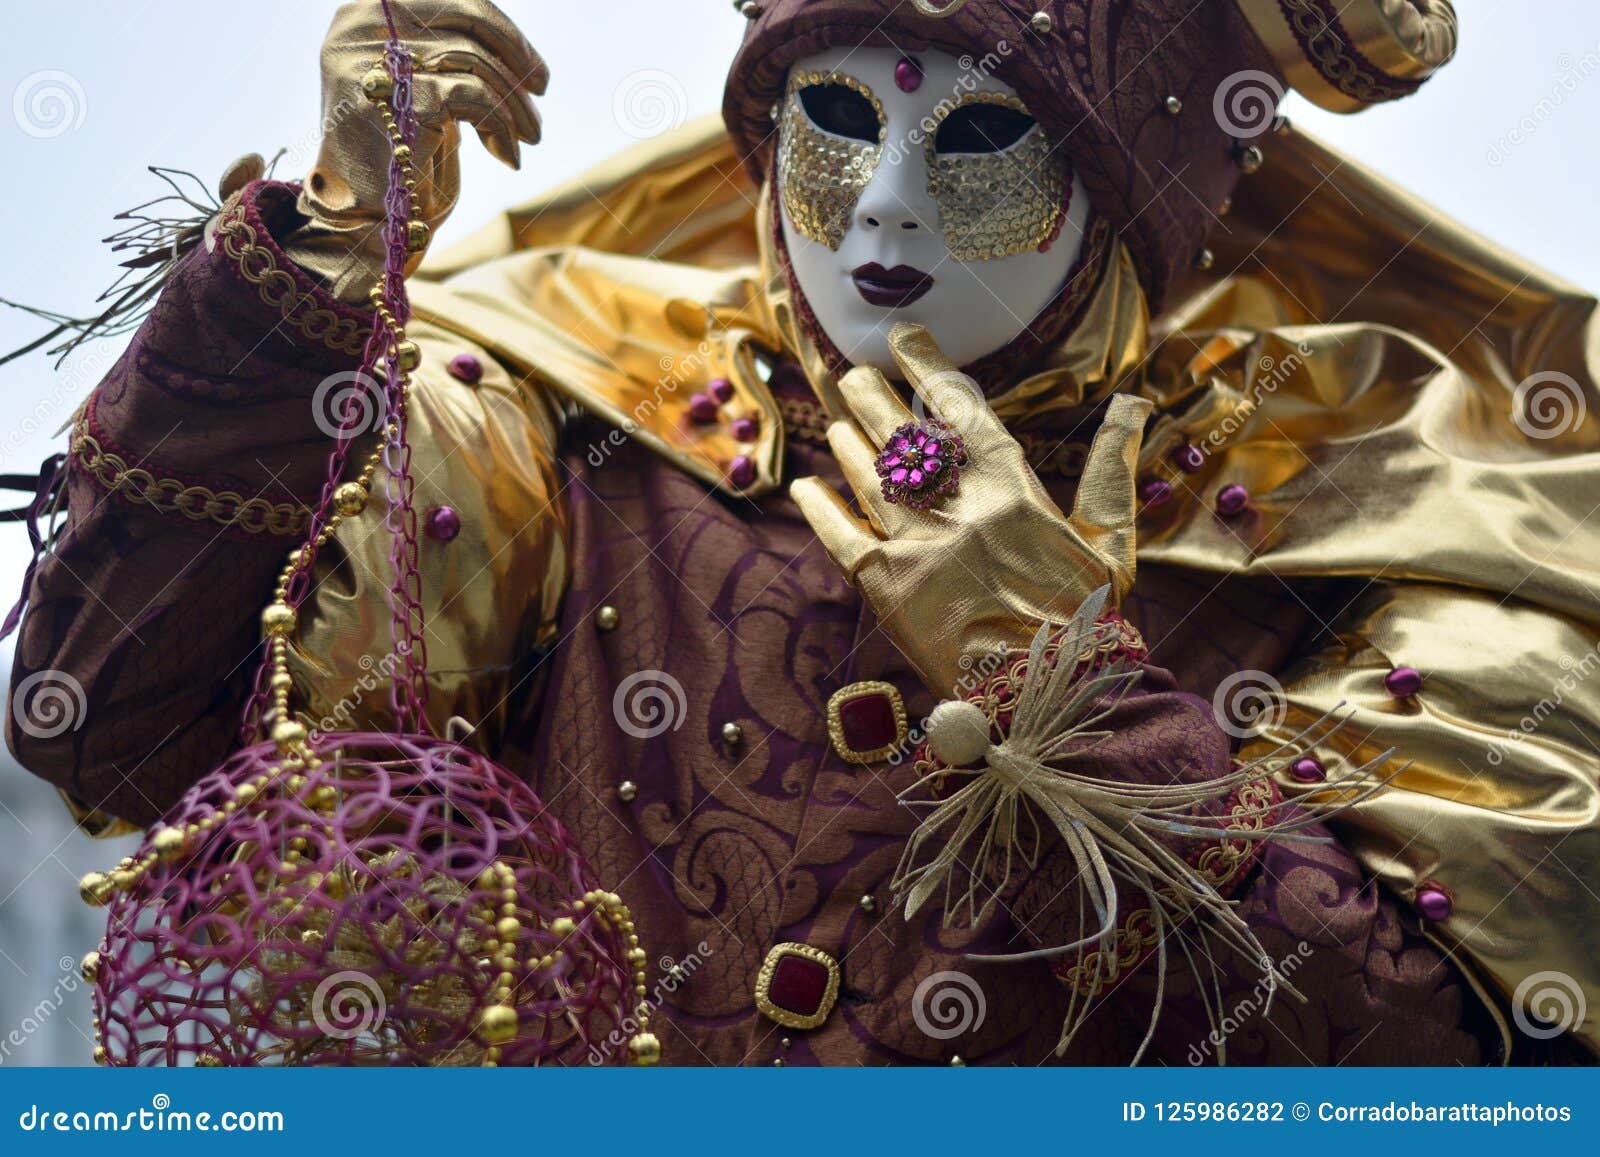 The Theatrical Mask of a Mime of the Carnival Stock Photo - Image of ...